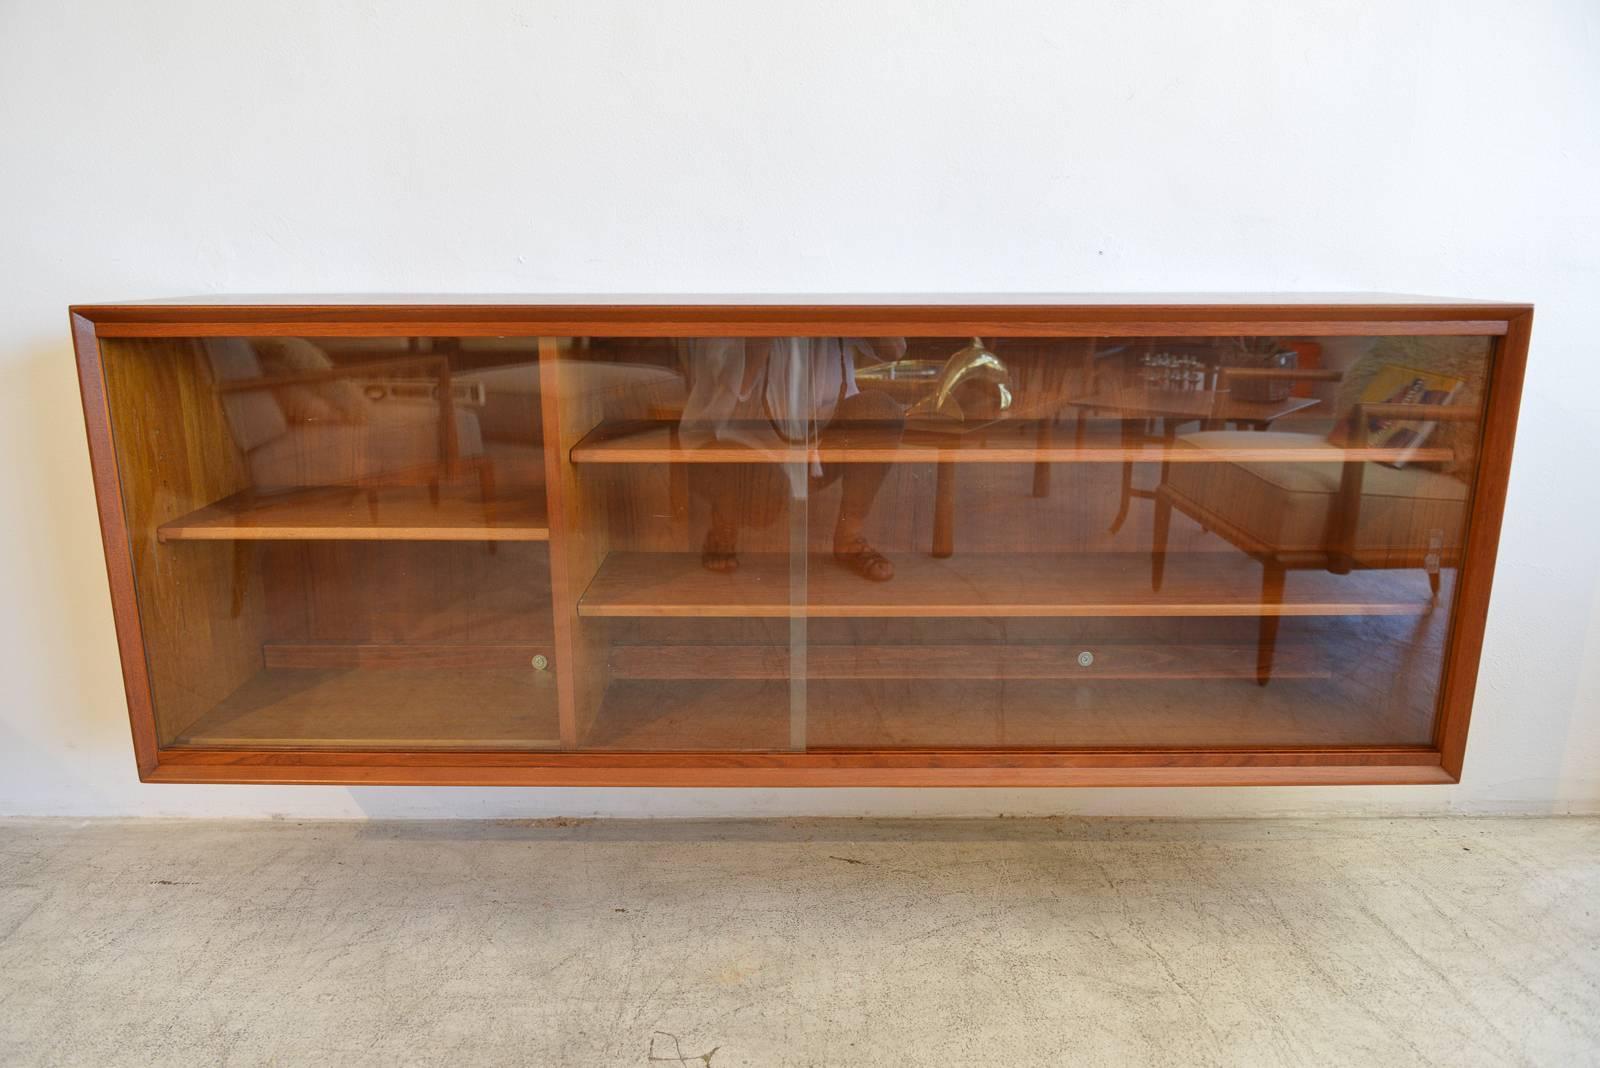 Teak wall-mounted Floating Cabinet by Gunni Omann, circa 1960. Includes two sliding glass doors and four adjustable shelves.

Could be used as a media cabinet for television components as well.

Measures: 63